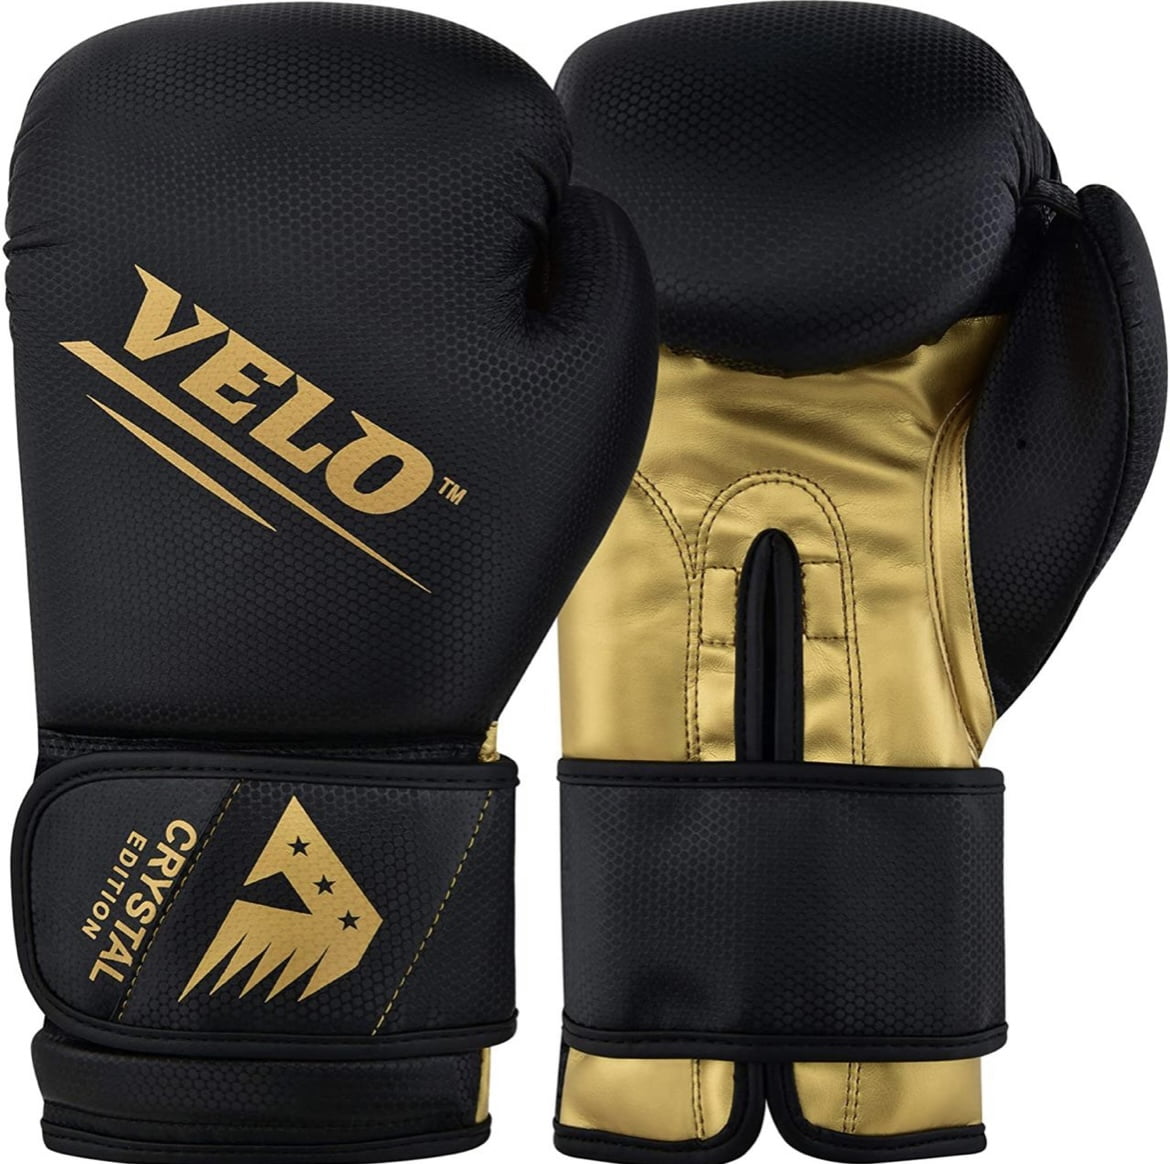 VELO Boxing Gloves Leather Gel Fight Punch Bag Muay thai MMA Kickboxing Sparring 